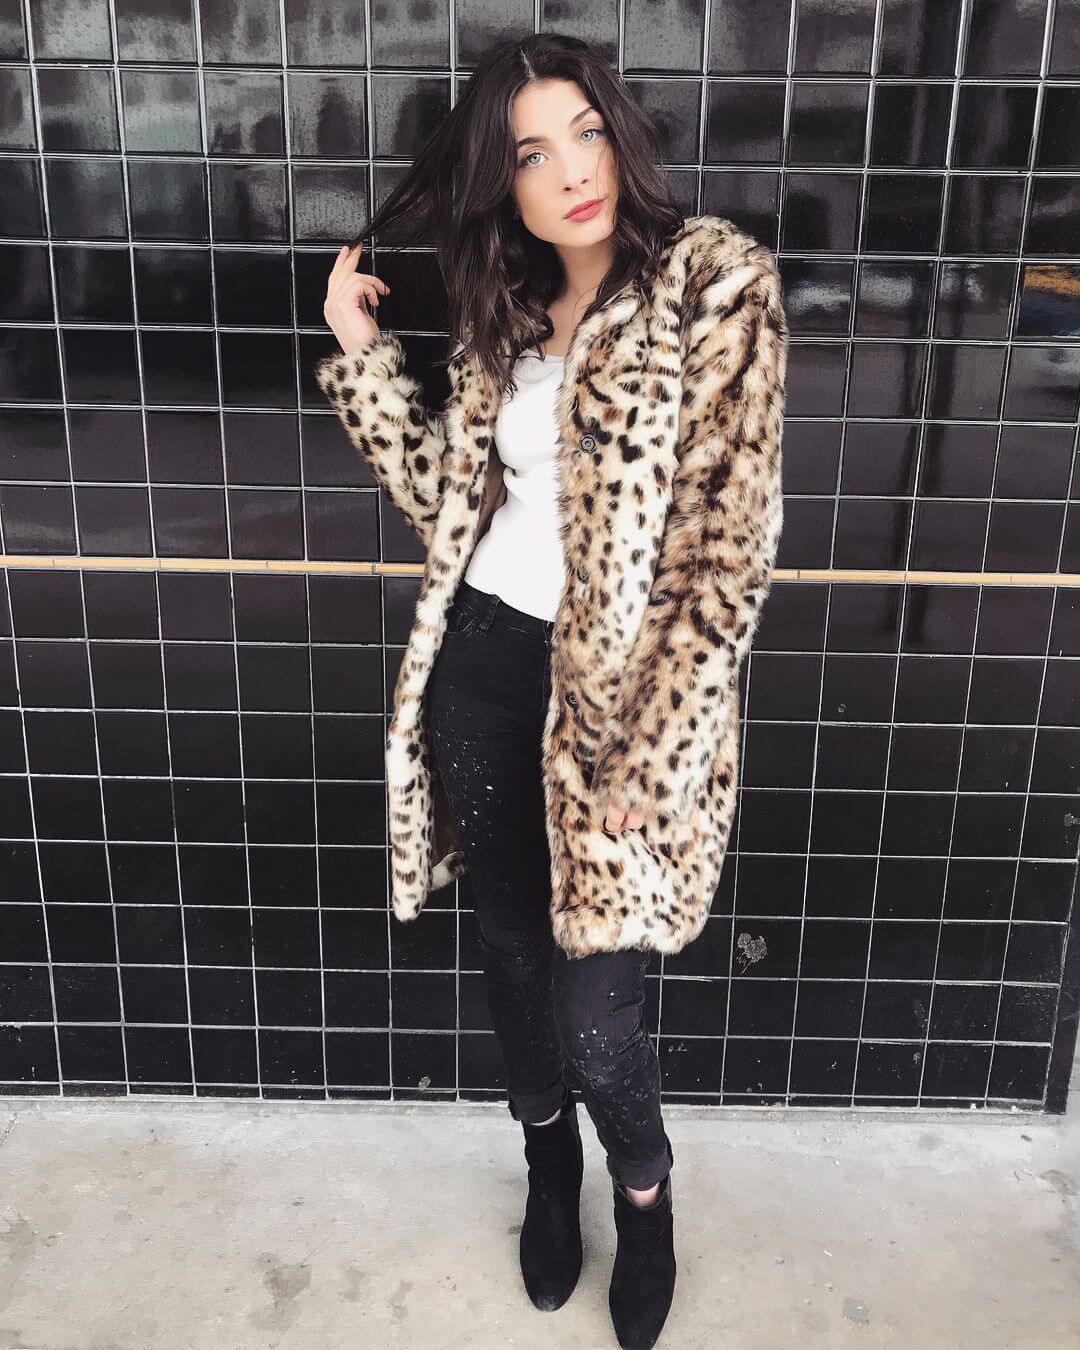 Stunning Niki In White Tee And Denim Jeans Topped With Animal Print Long Jacket